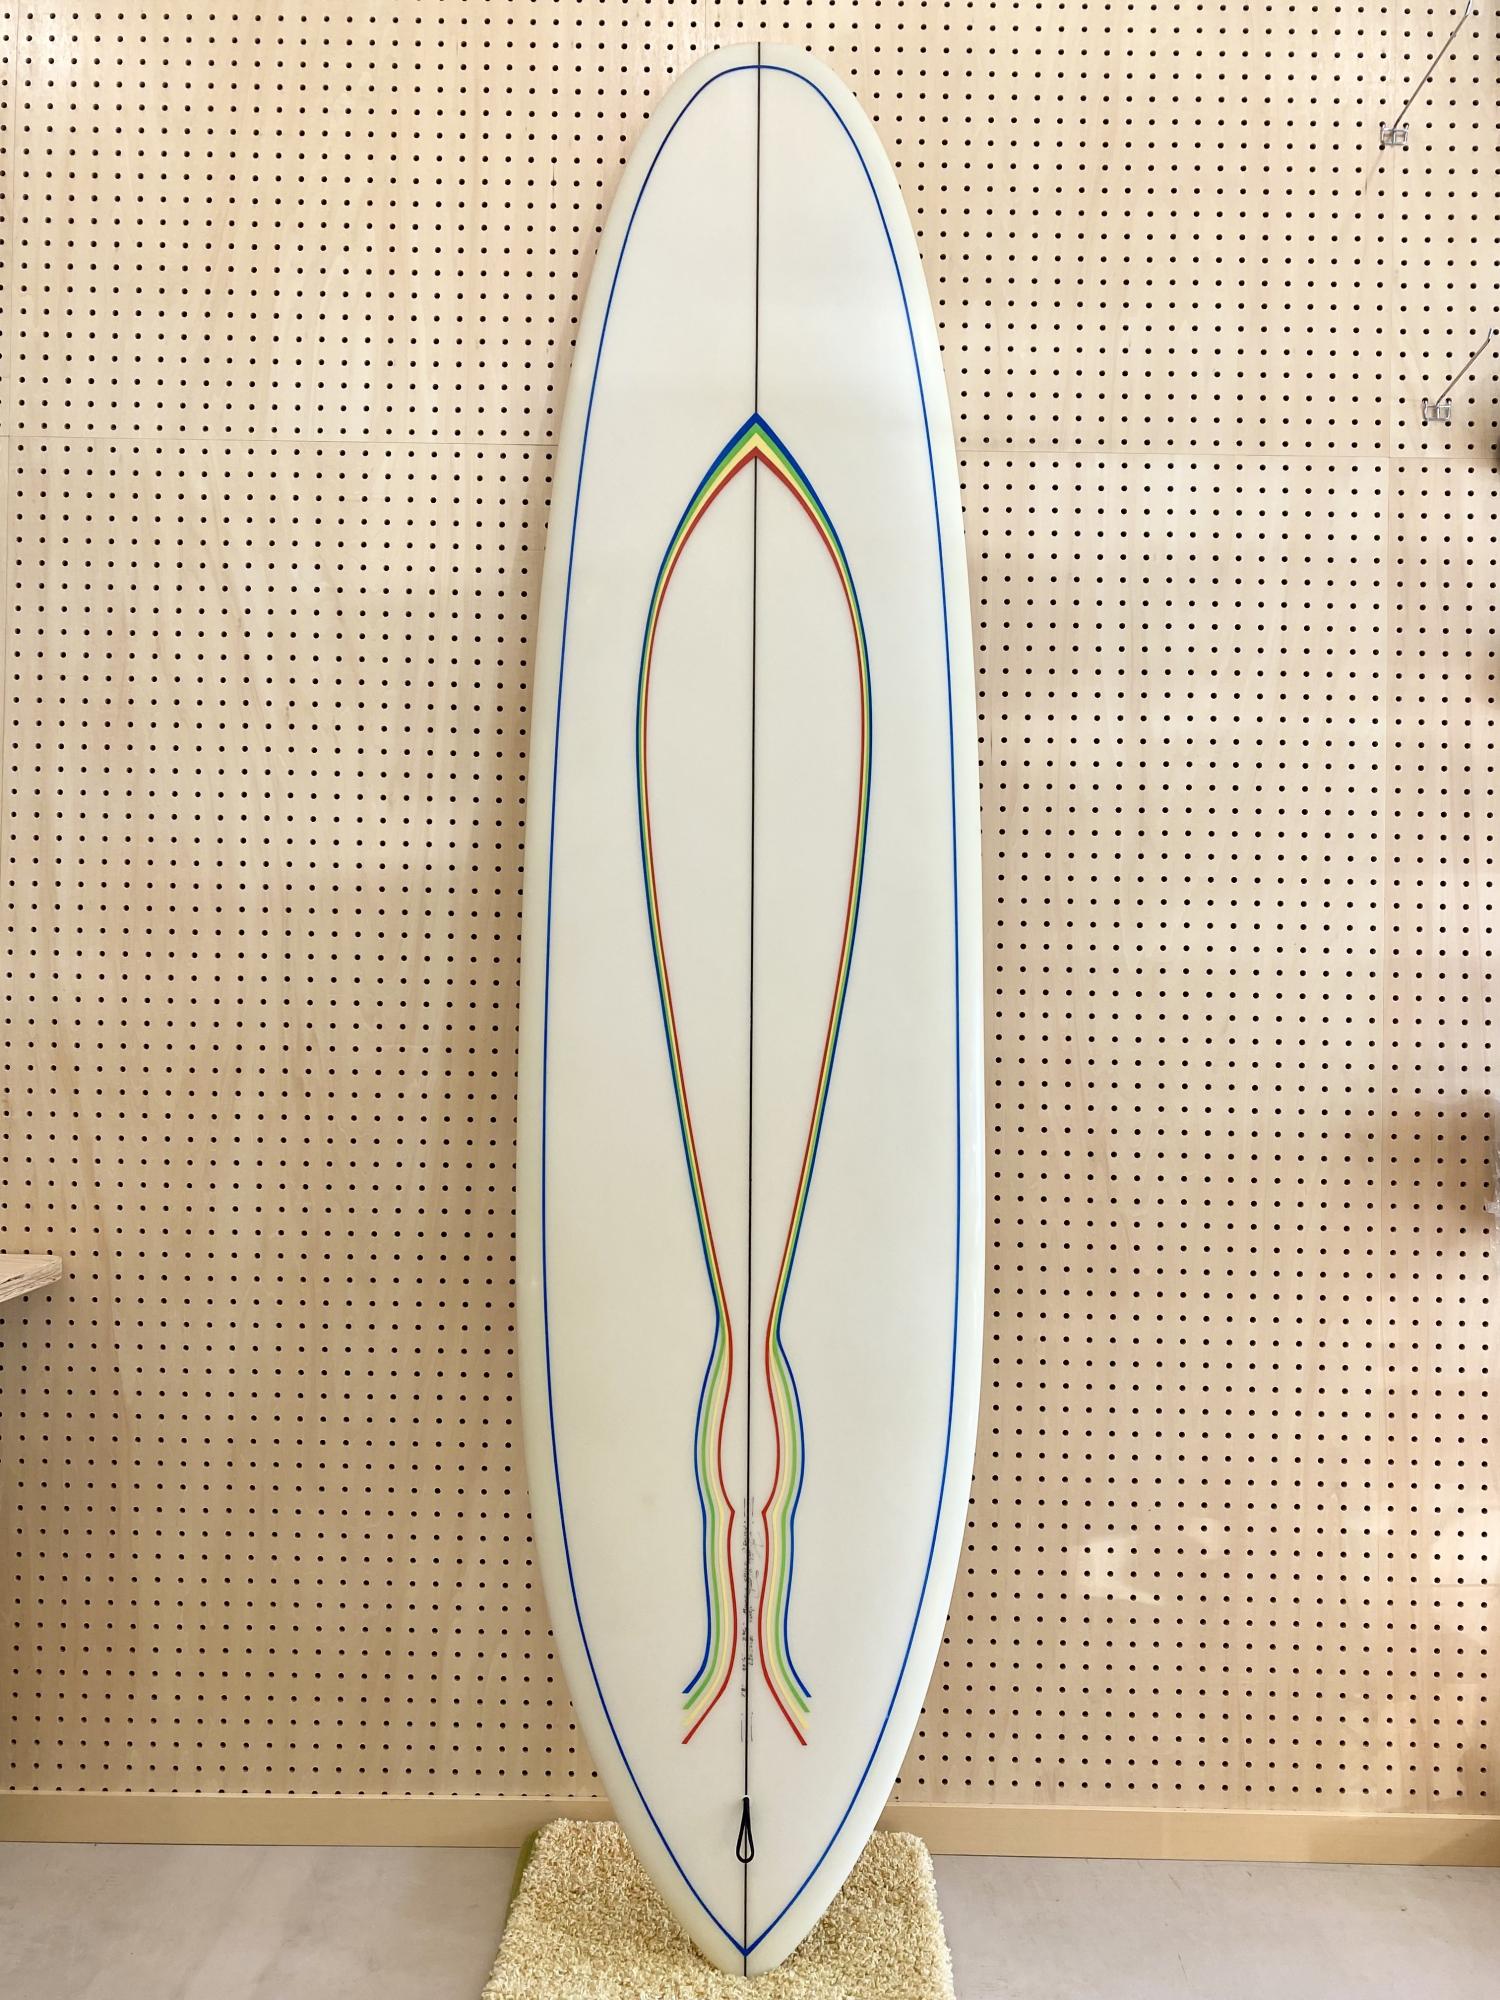 USED (Mindful Child model 7.8 WOODIN SURFBOARDS)